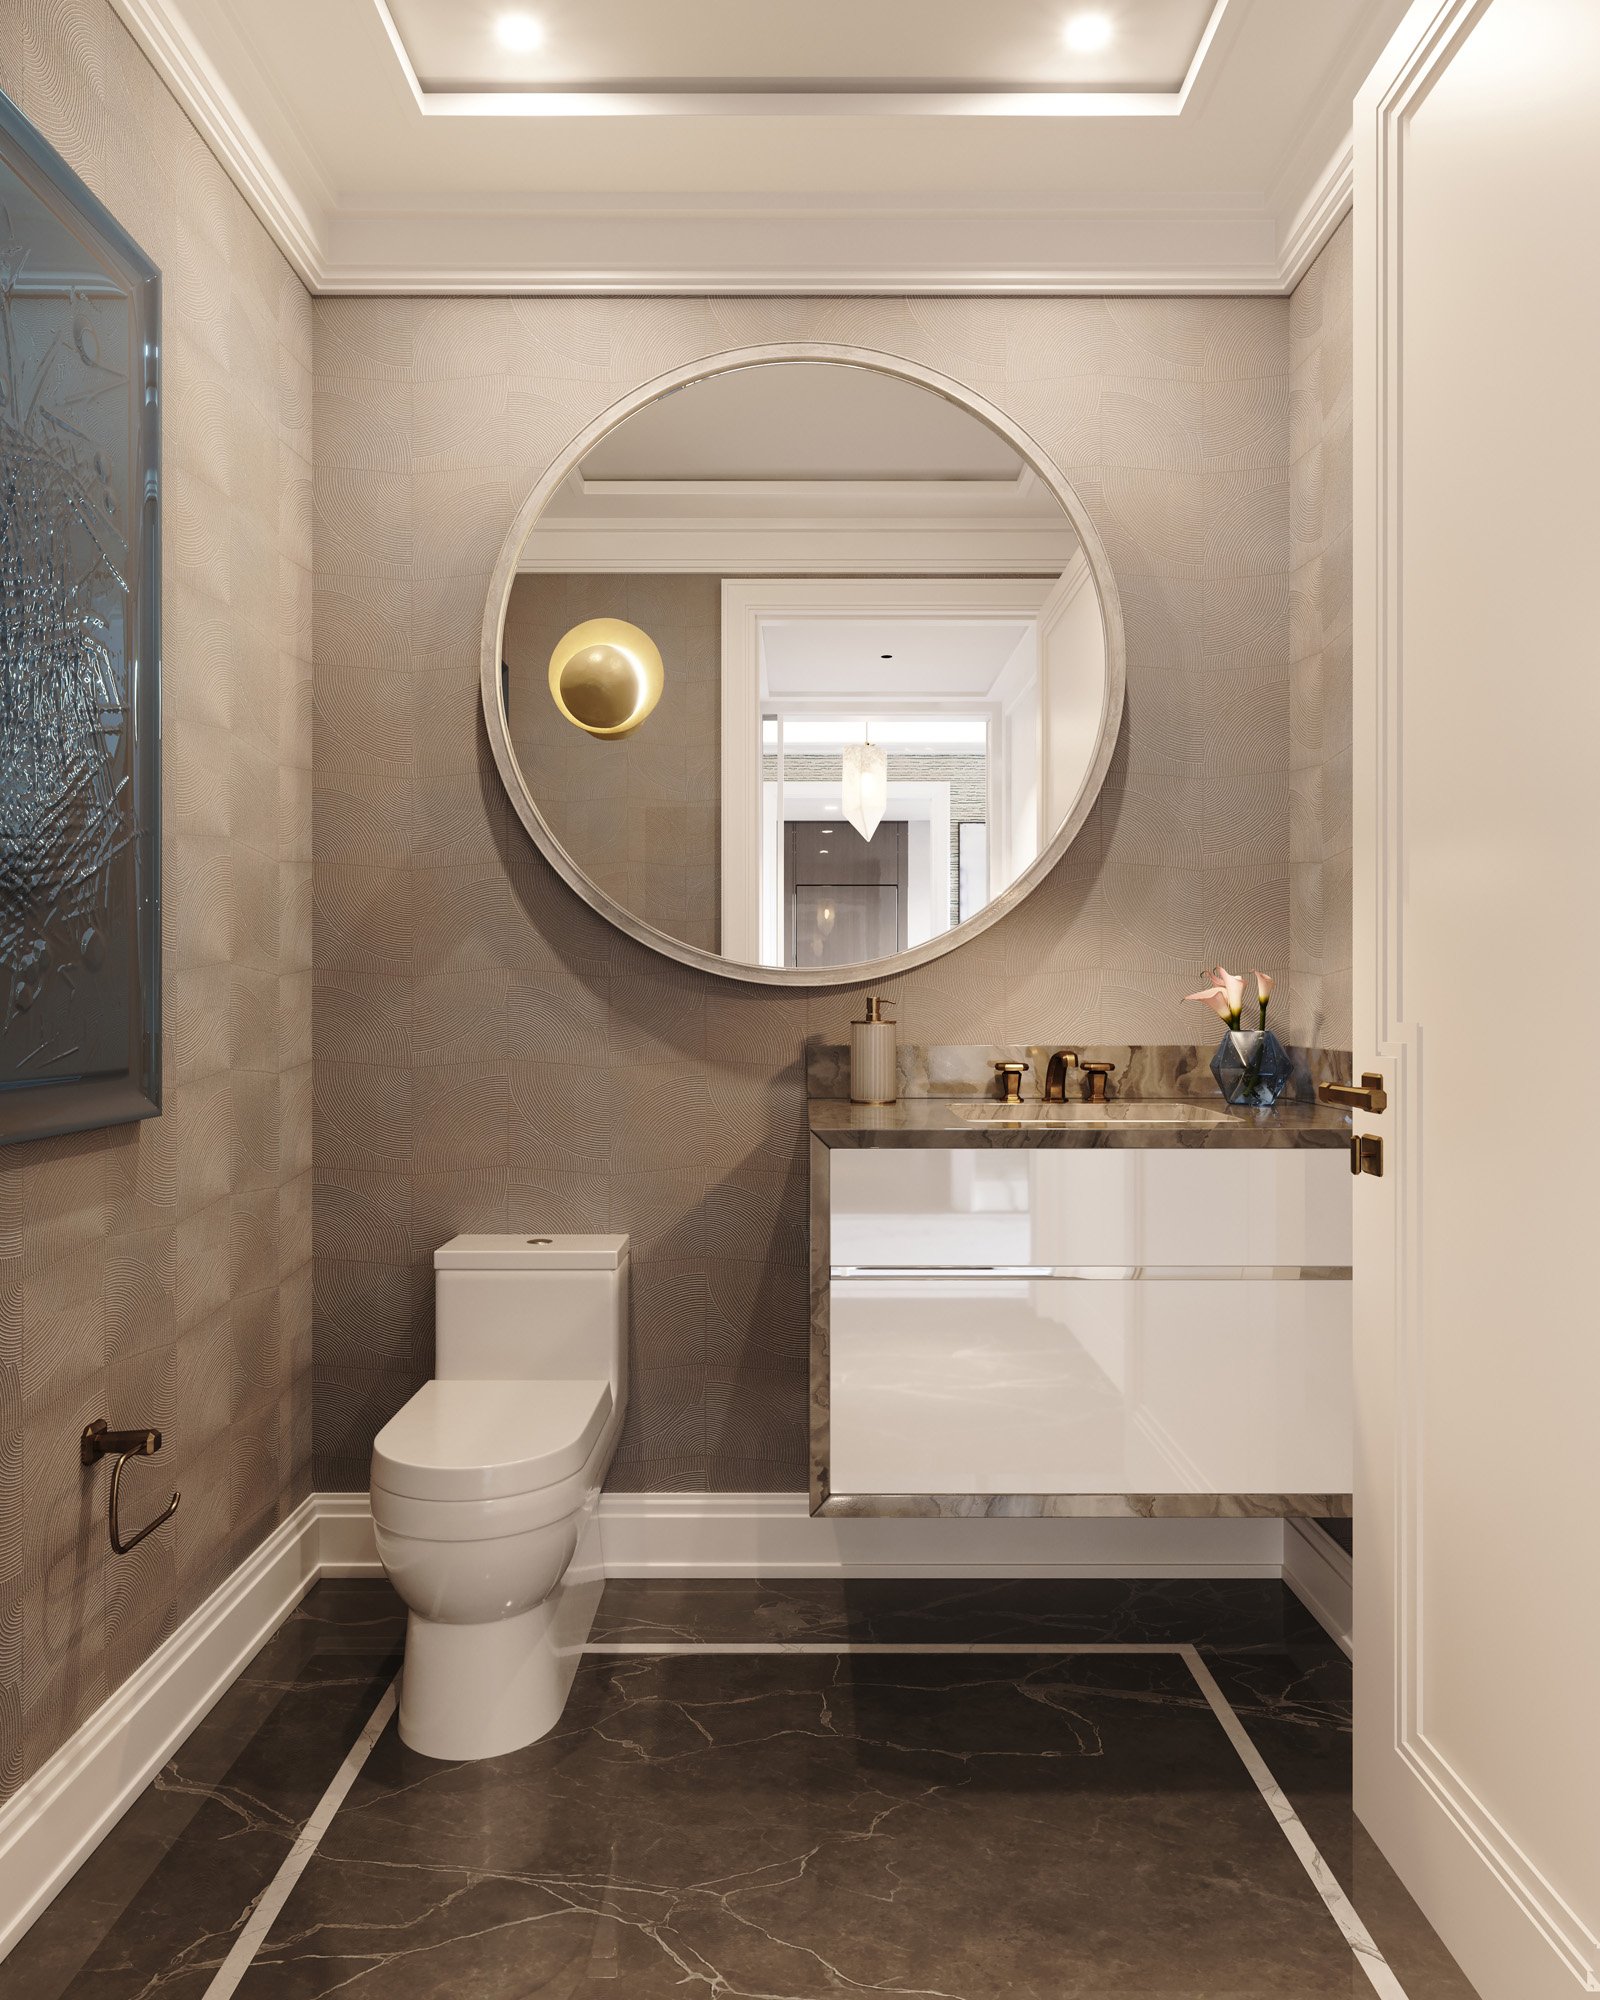 Powder Room of a Waldorf Astoria Luxury Apartment in NYC